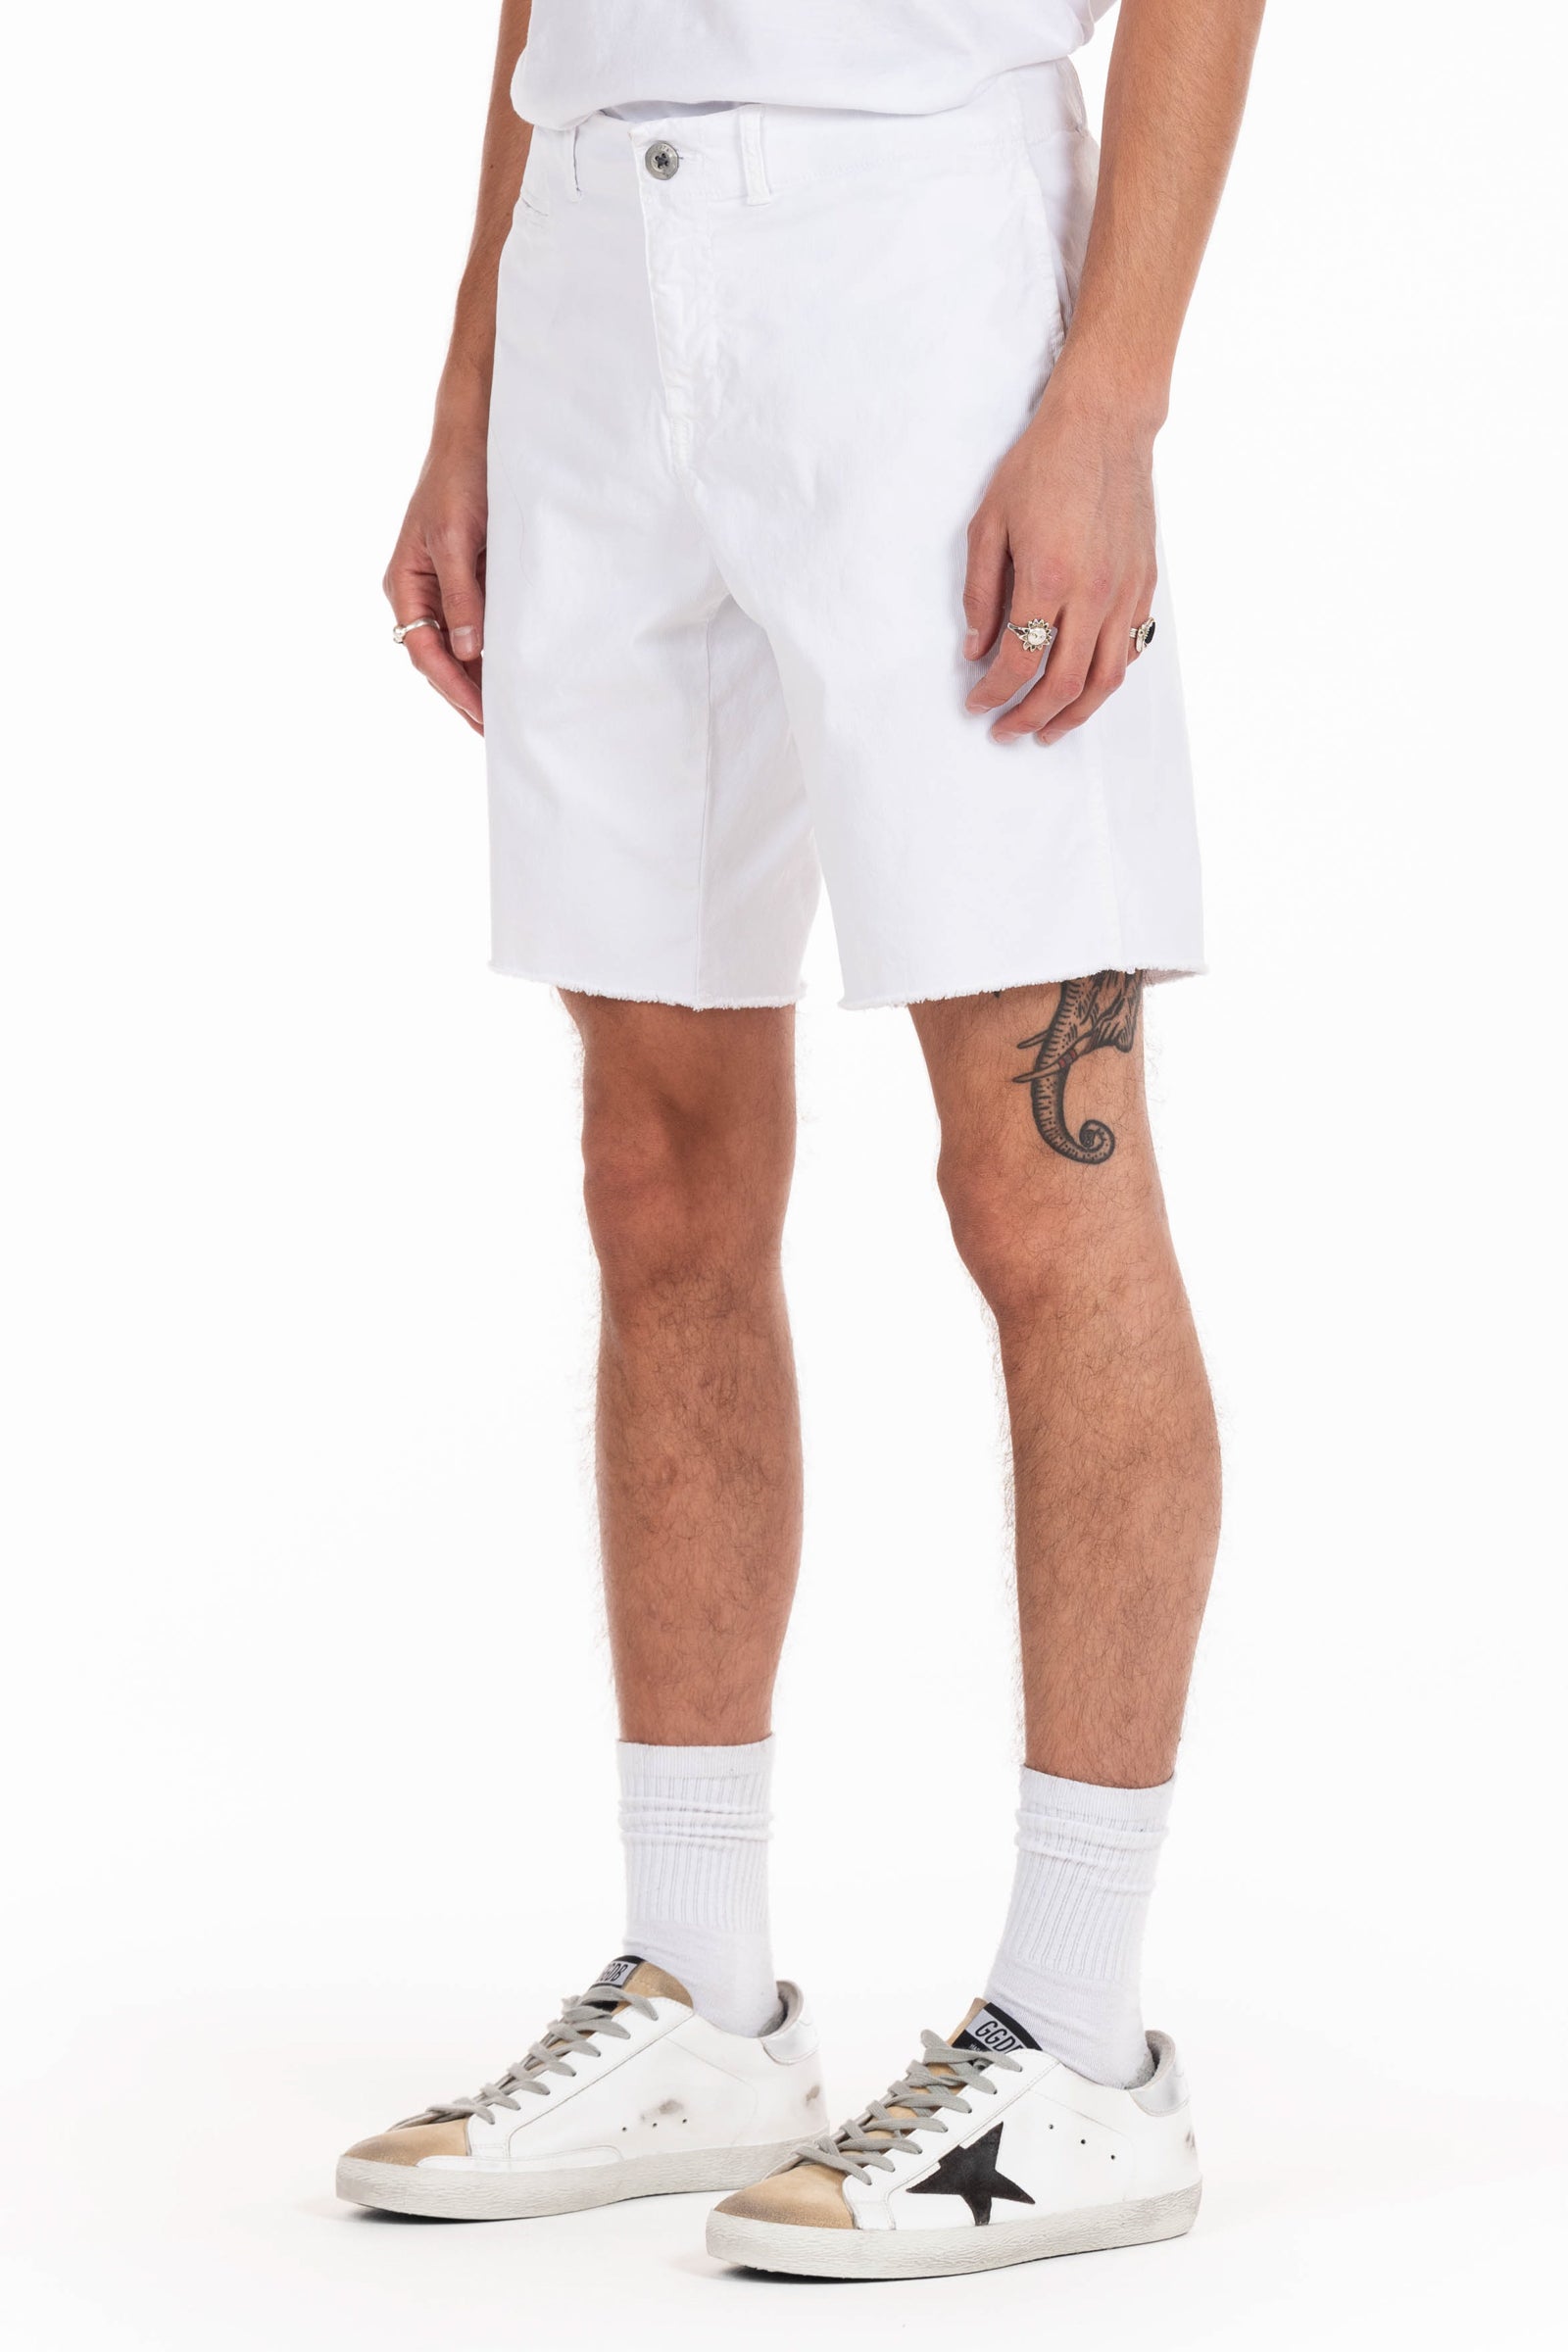 Original Paperbacks Rockland Chino Short in White on Model Cropped Side View